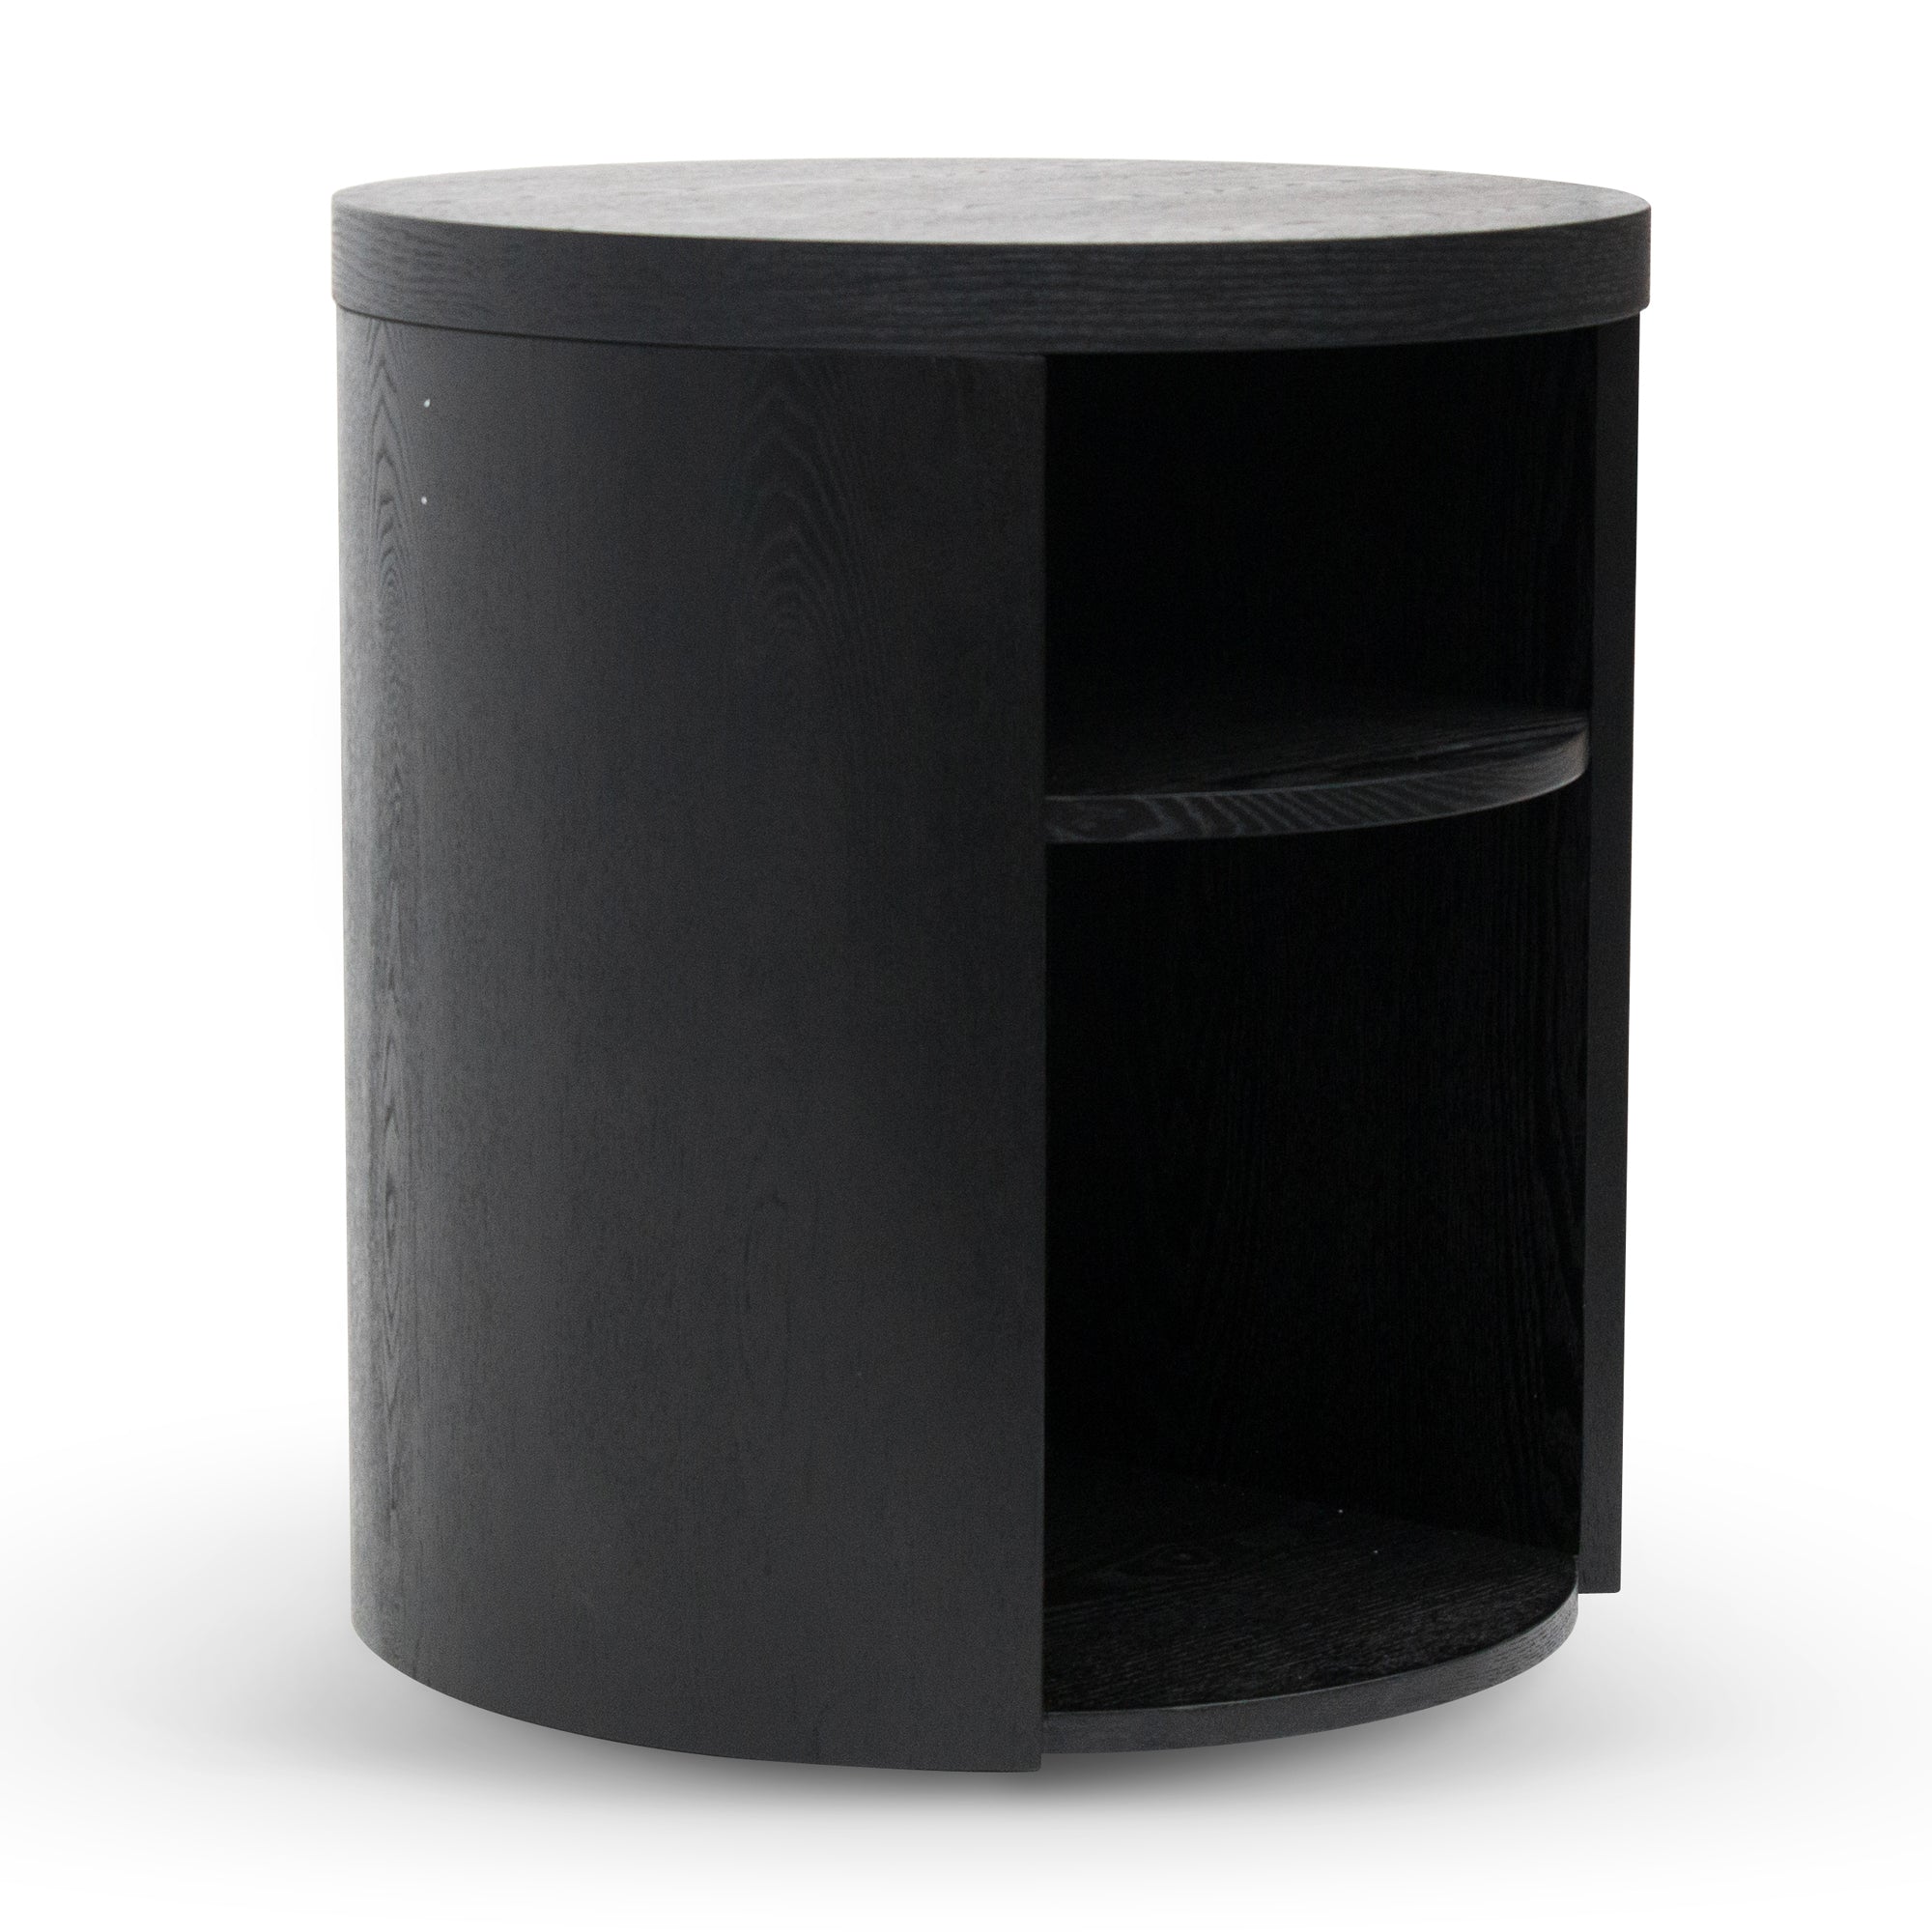 Amelia Round Wooden Bedside Table - Black Mountain - Bedside Tables